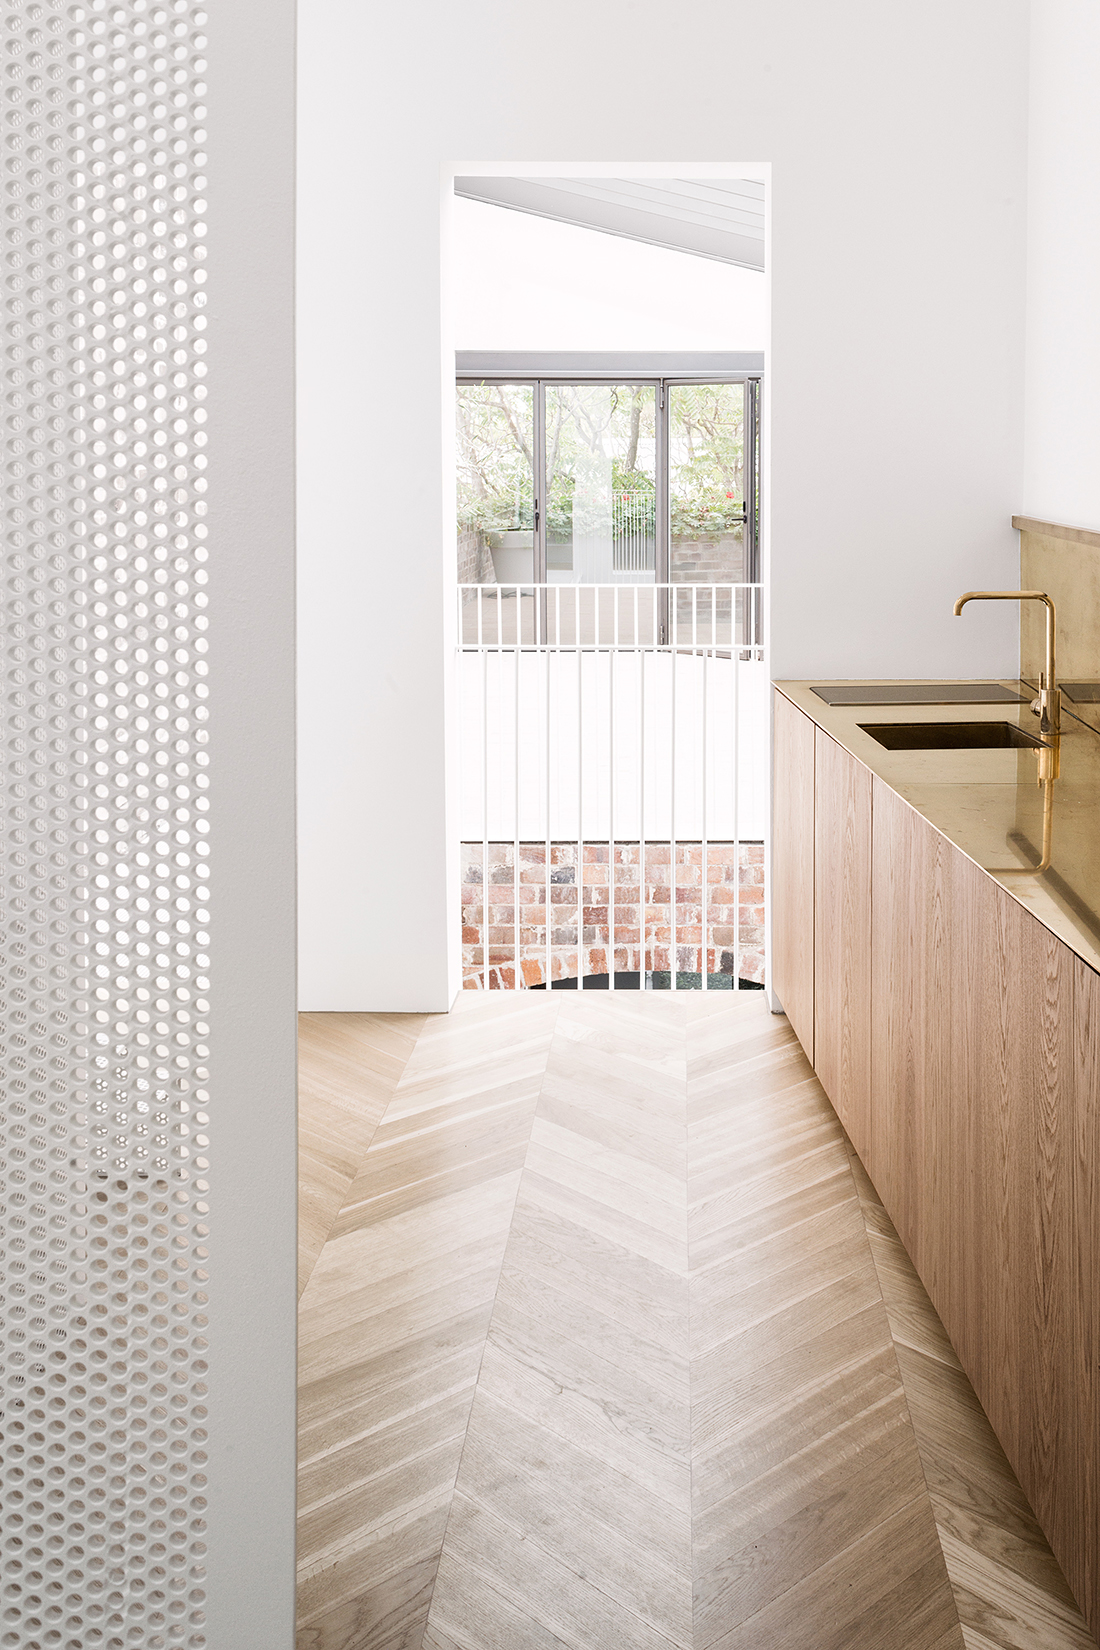 Brass & Perforated Metal Kitchen by Renato D'Ettorre